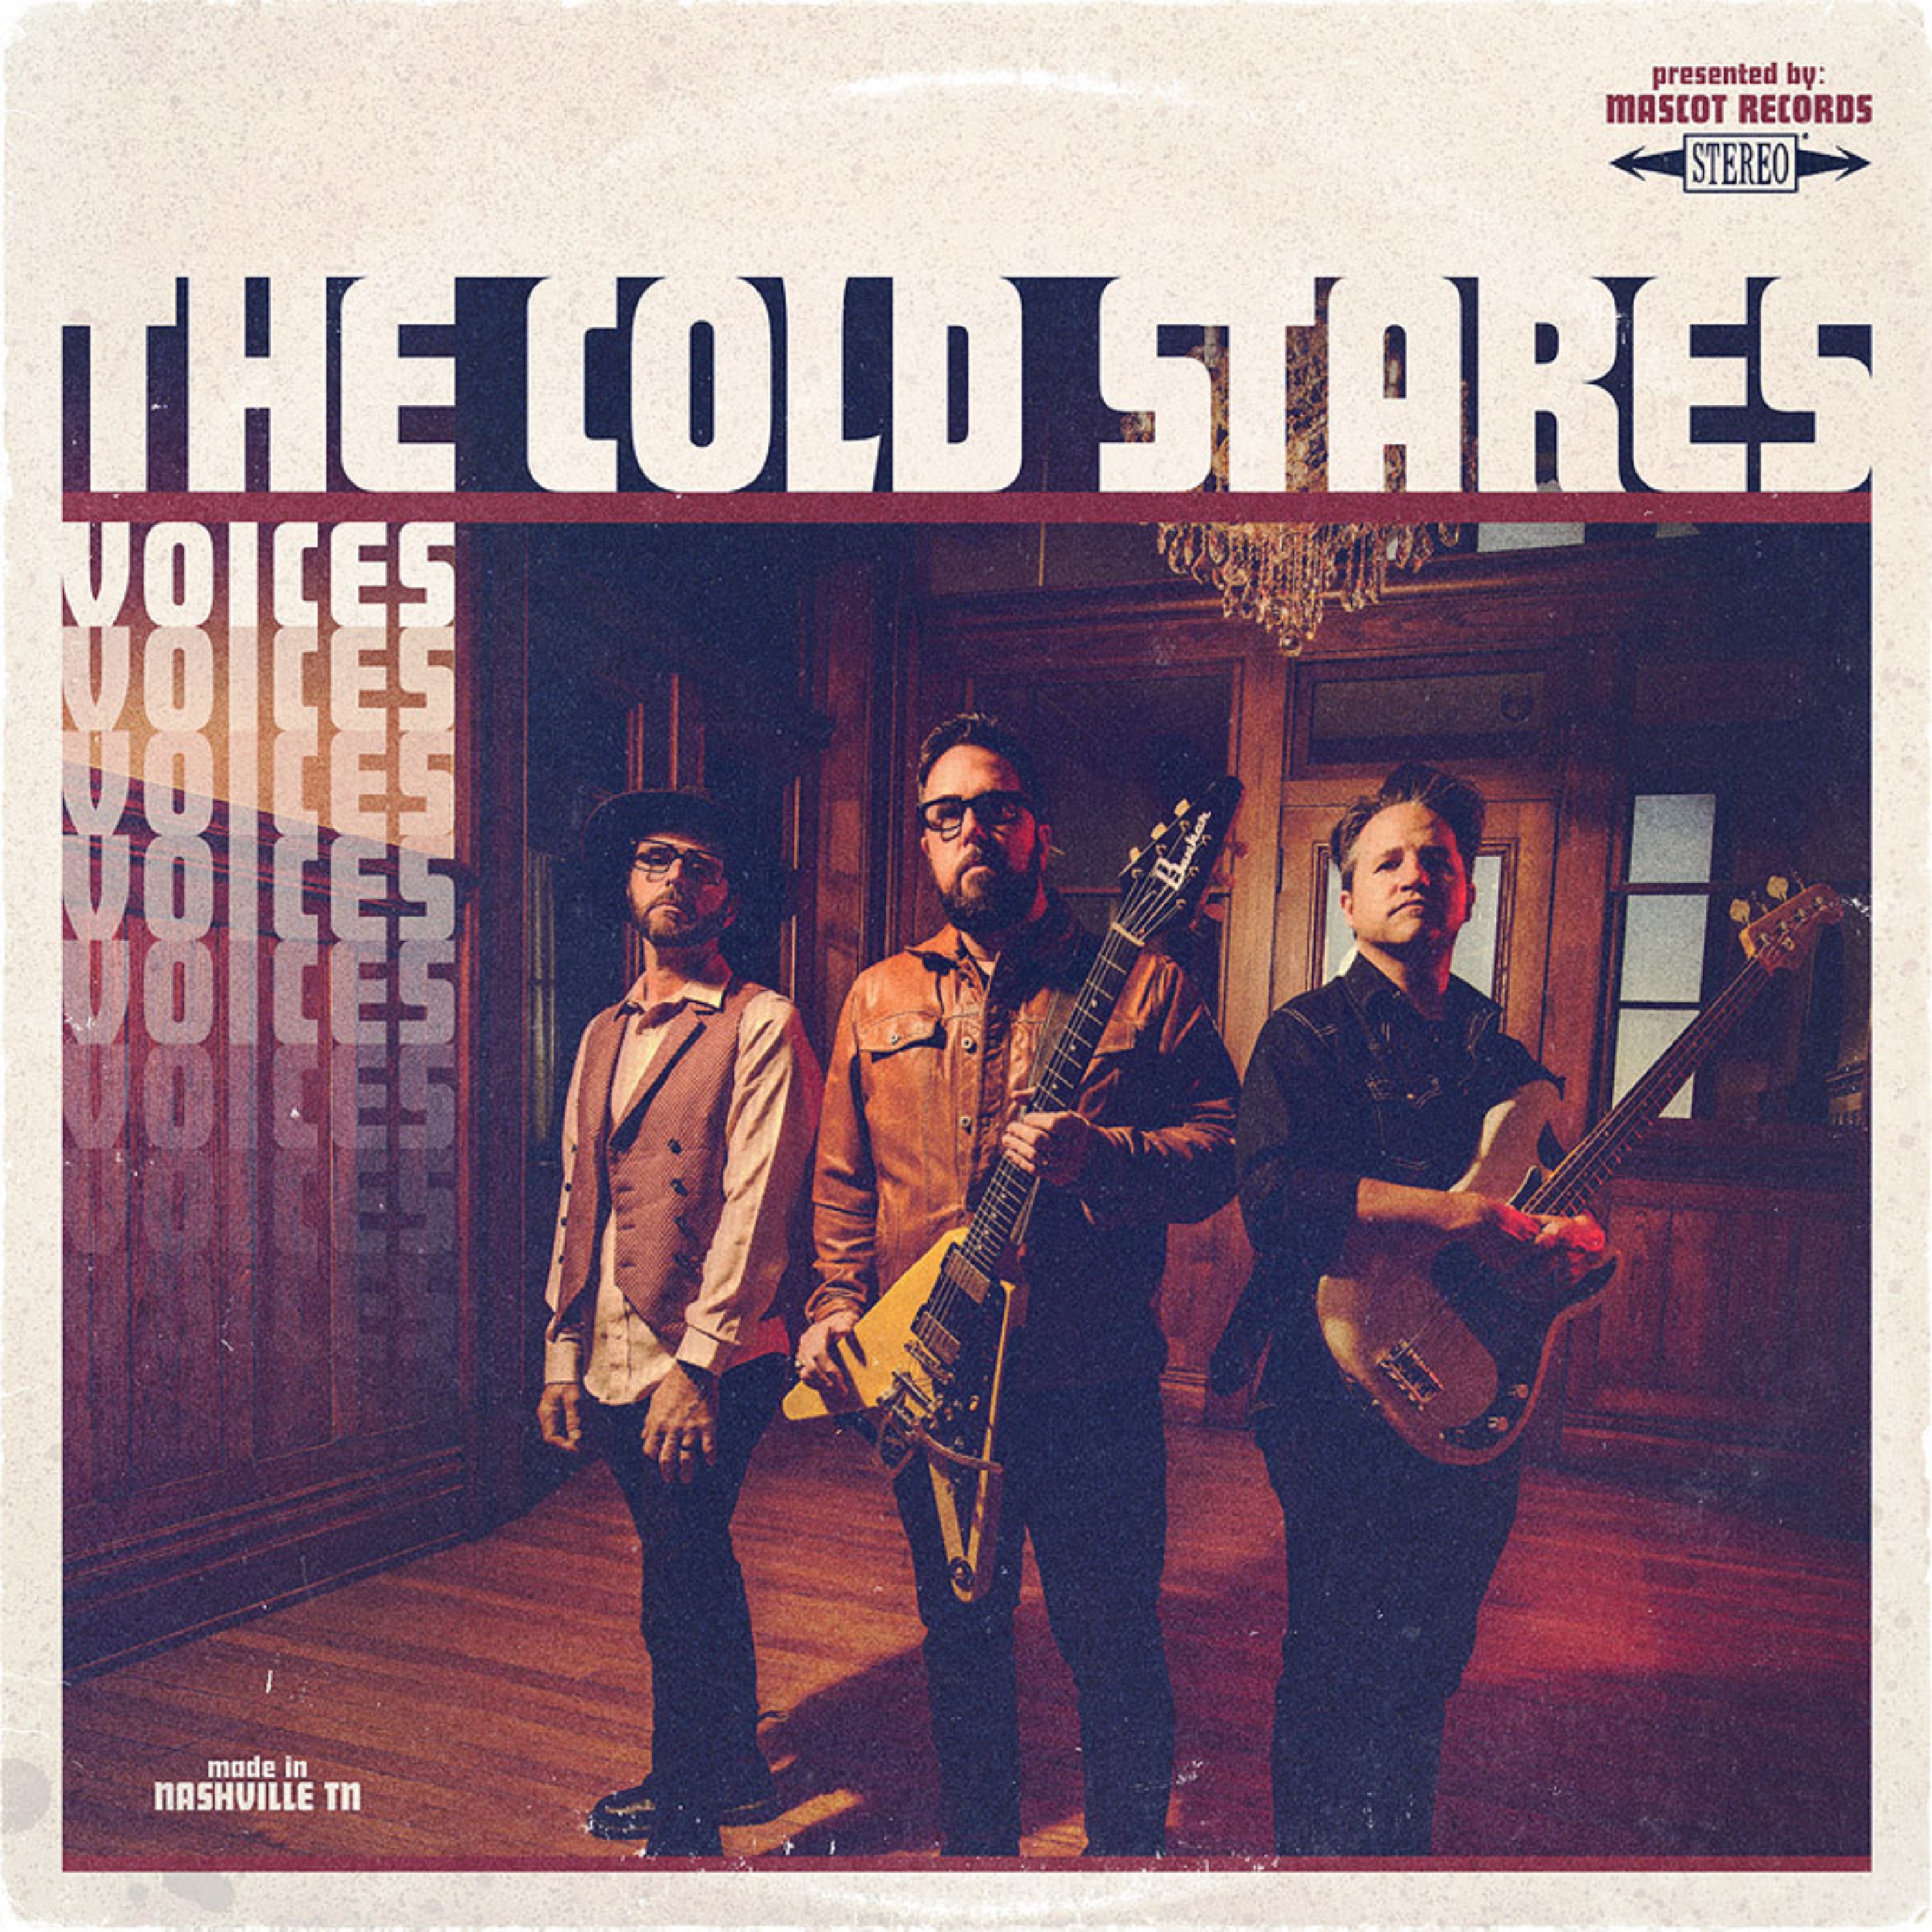 Blues-rock outfit The Cold Stares release their new full-length album ‘Voices,’ out today